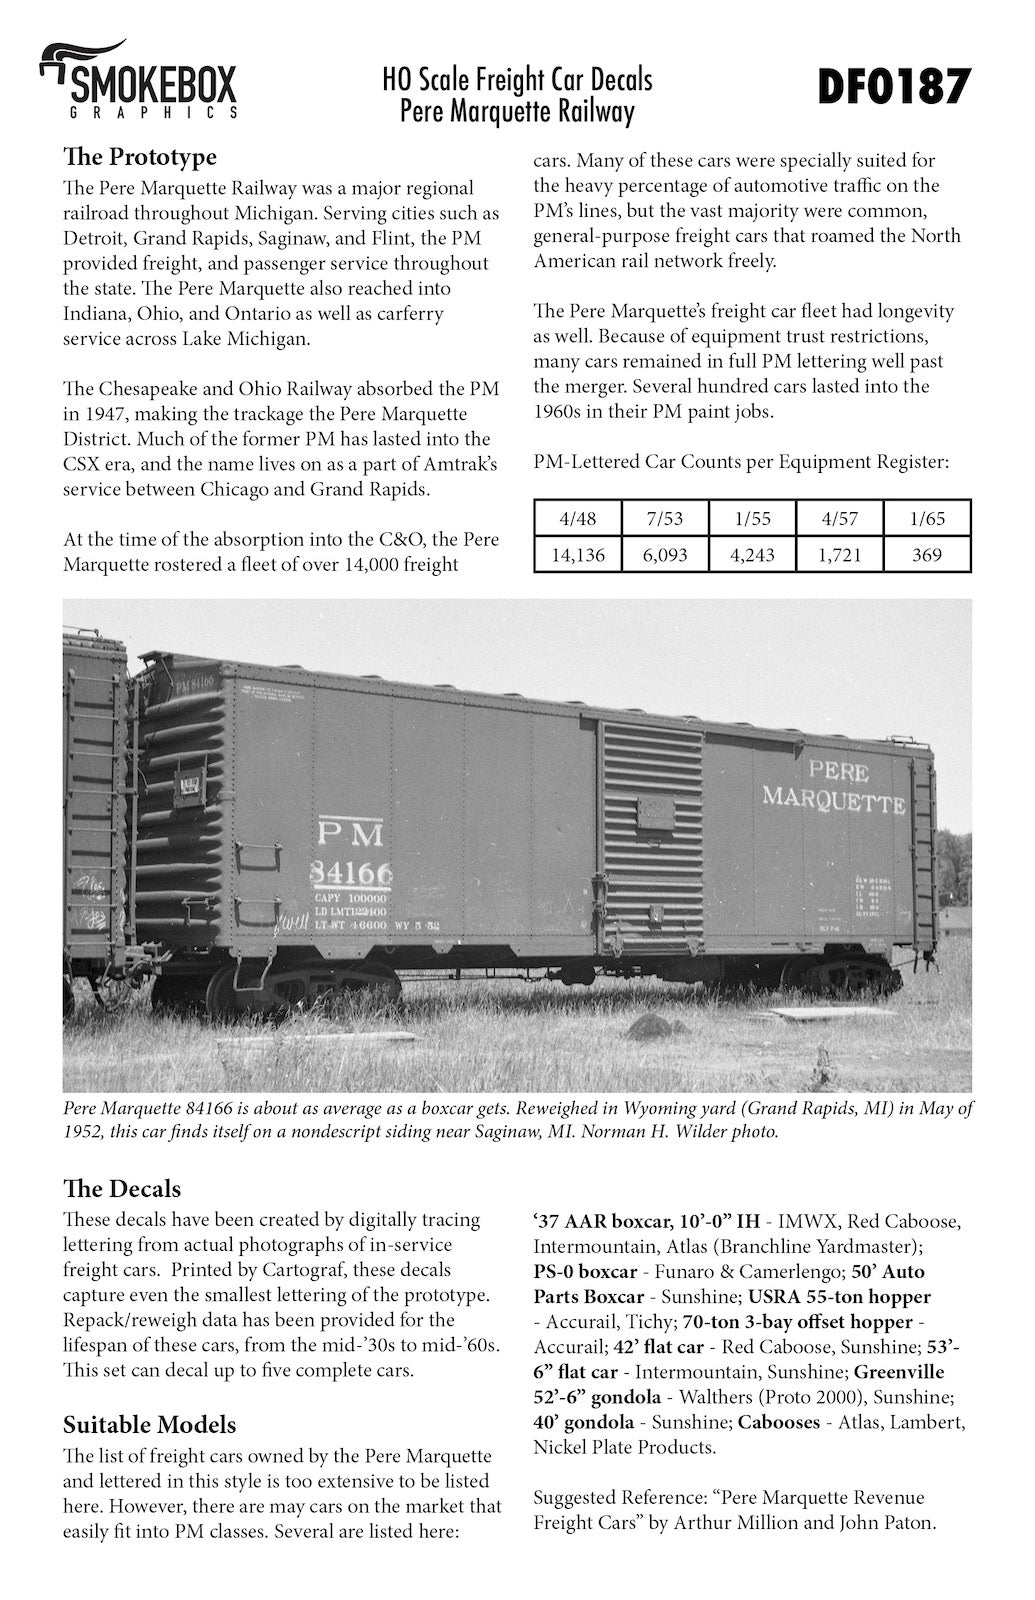 DF0187 Pere Marquette Freight Cars